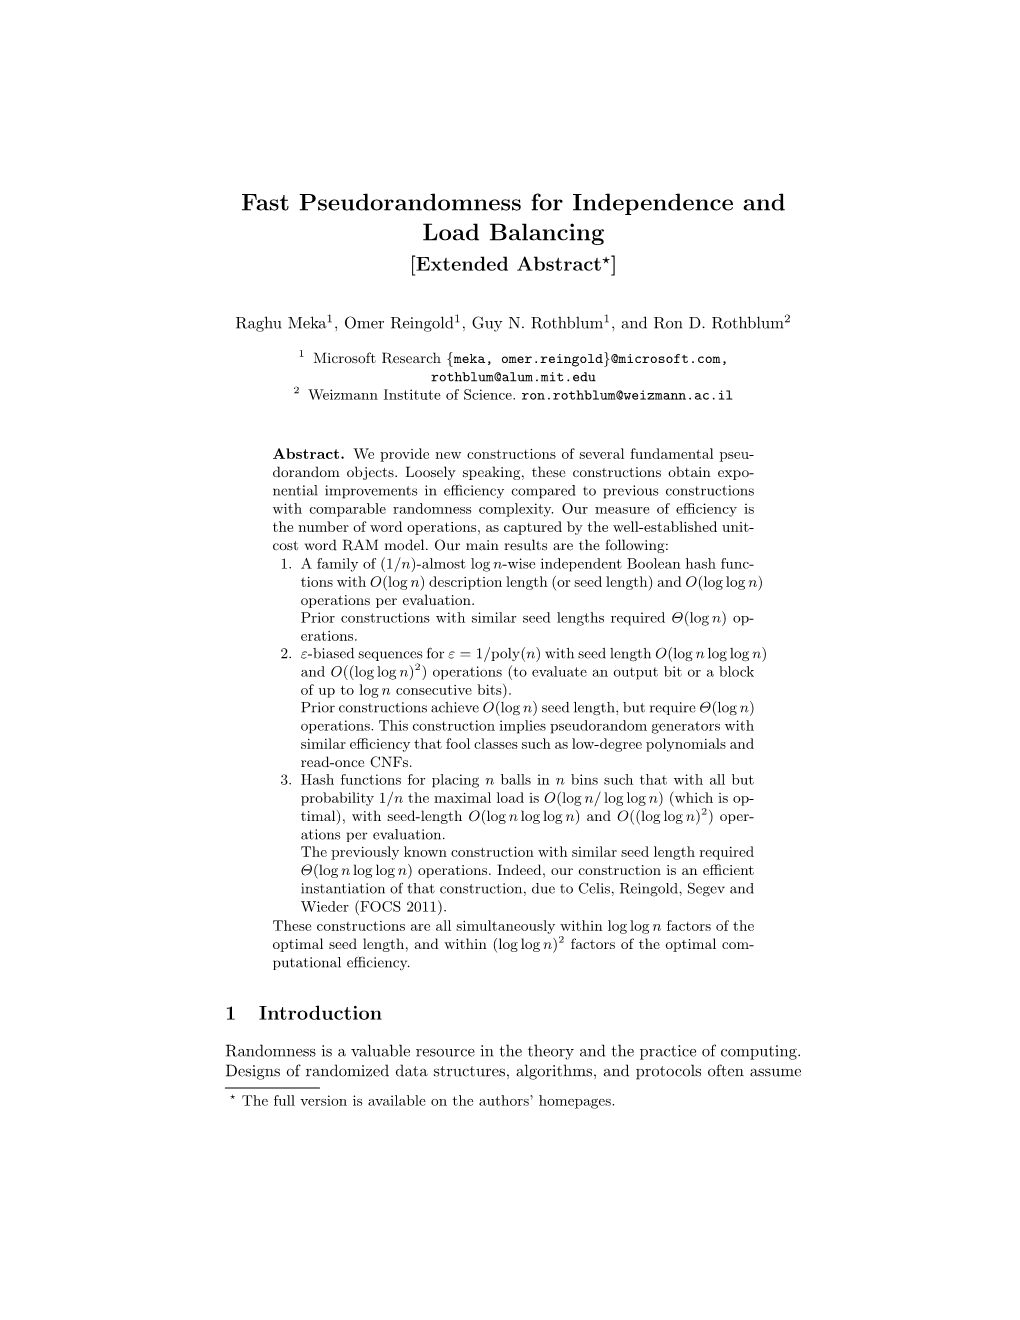 Fast Pseudorandomness for Independence and Load Balancing [Extended Abstract?]